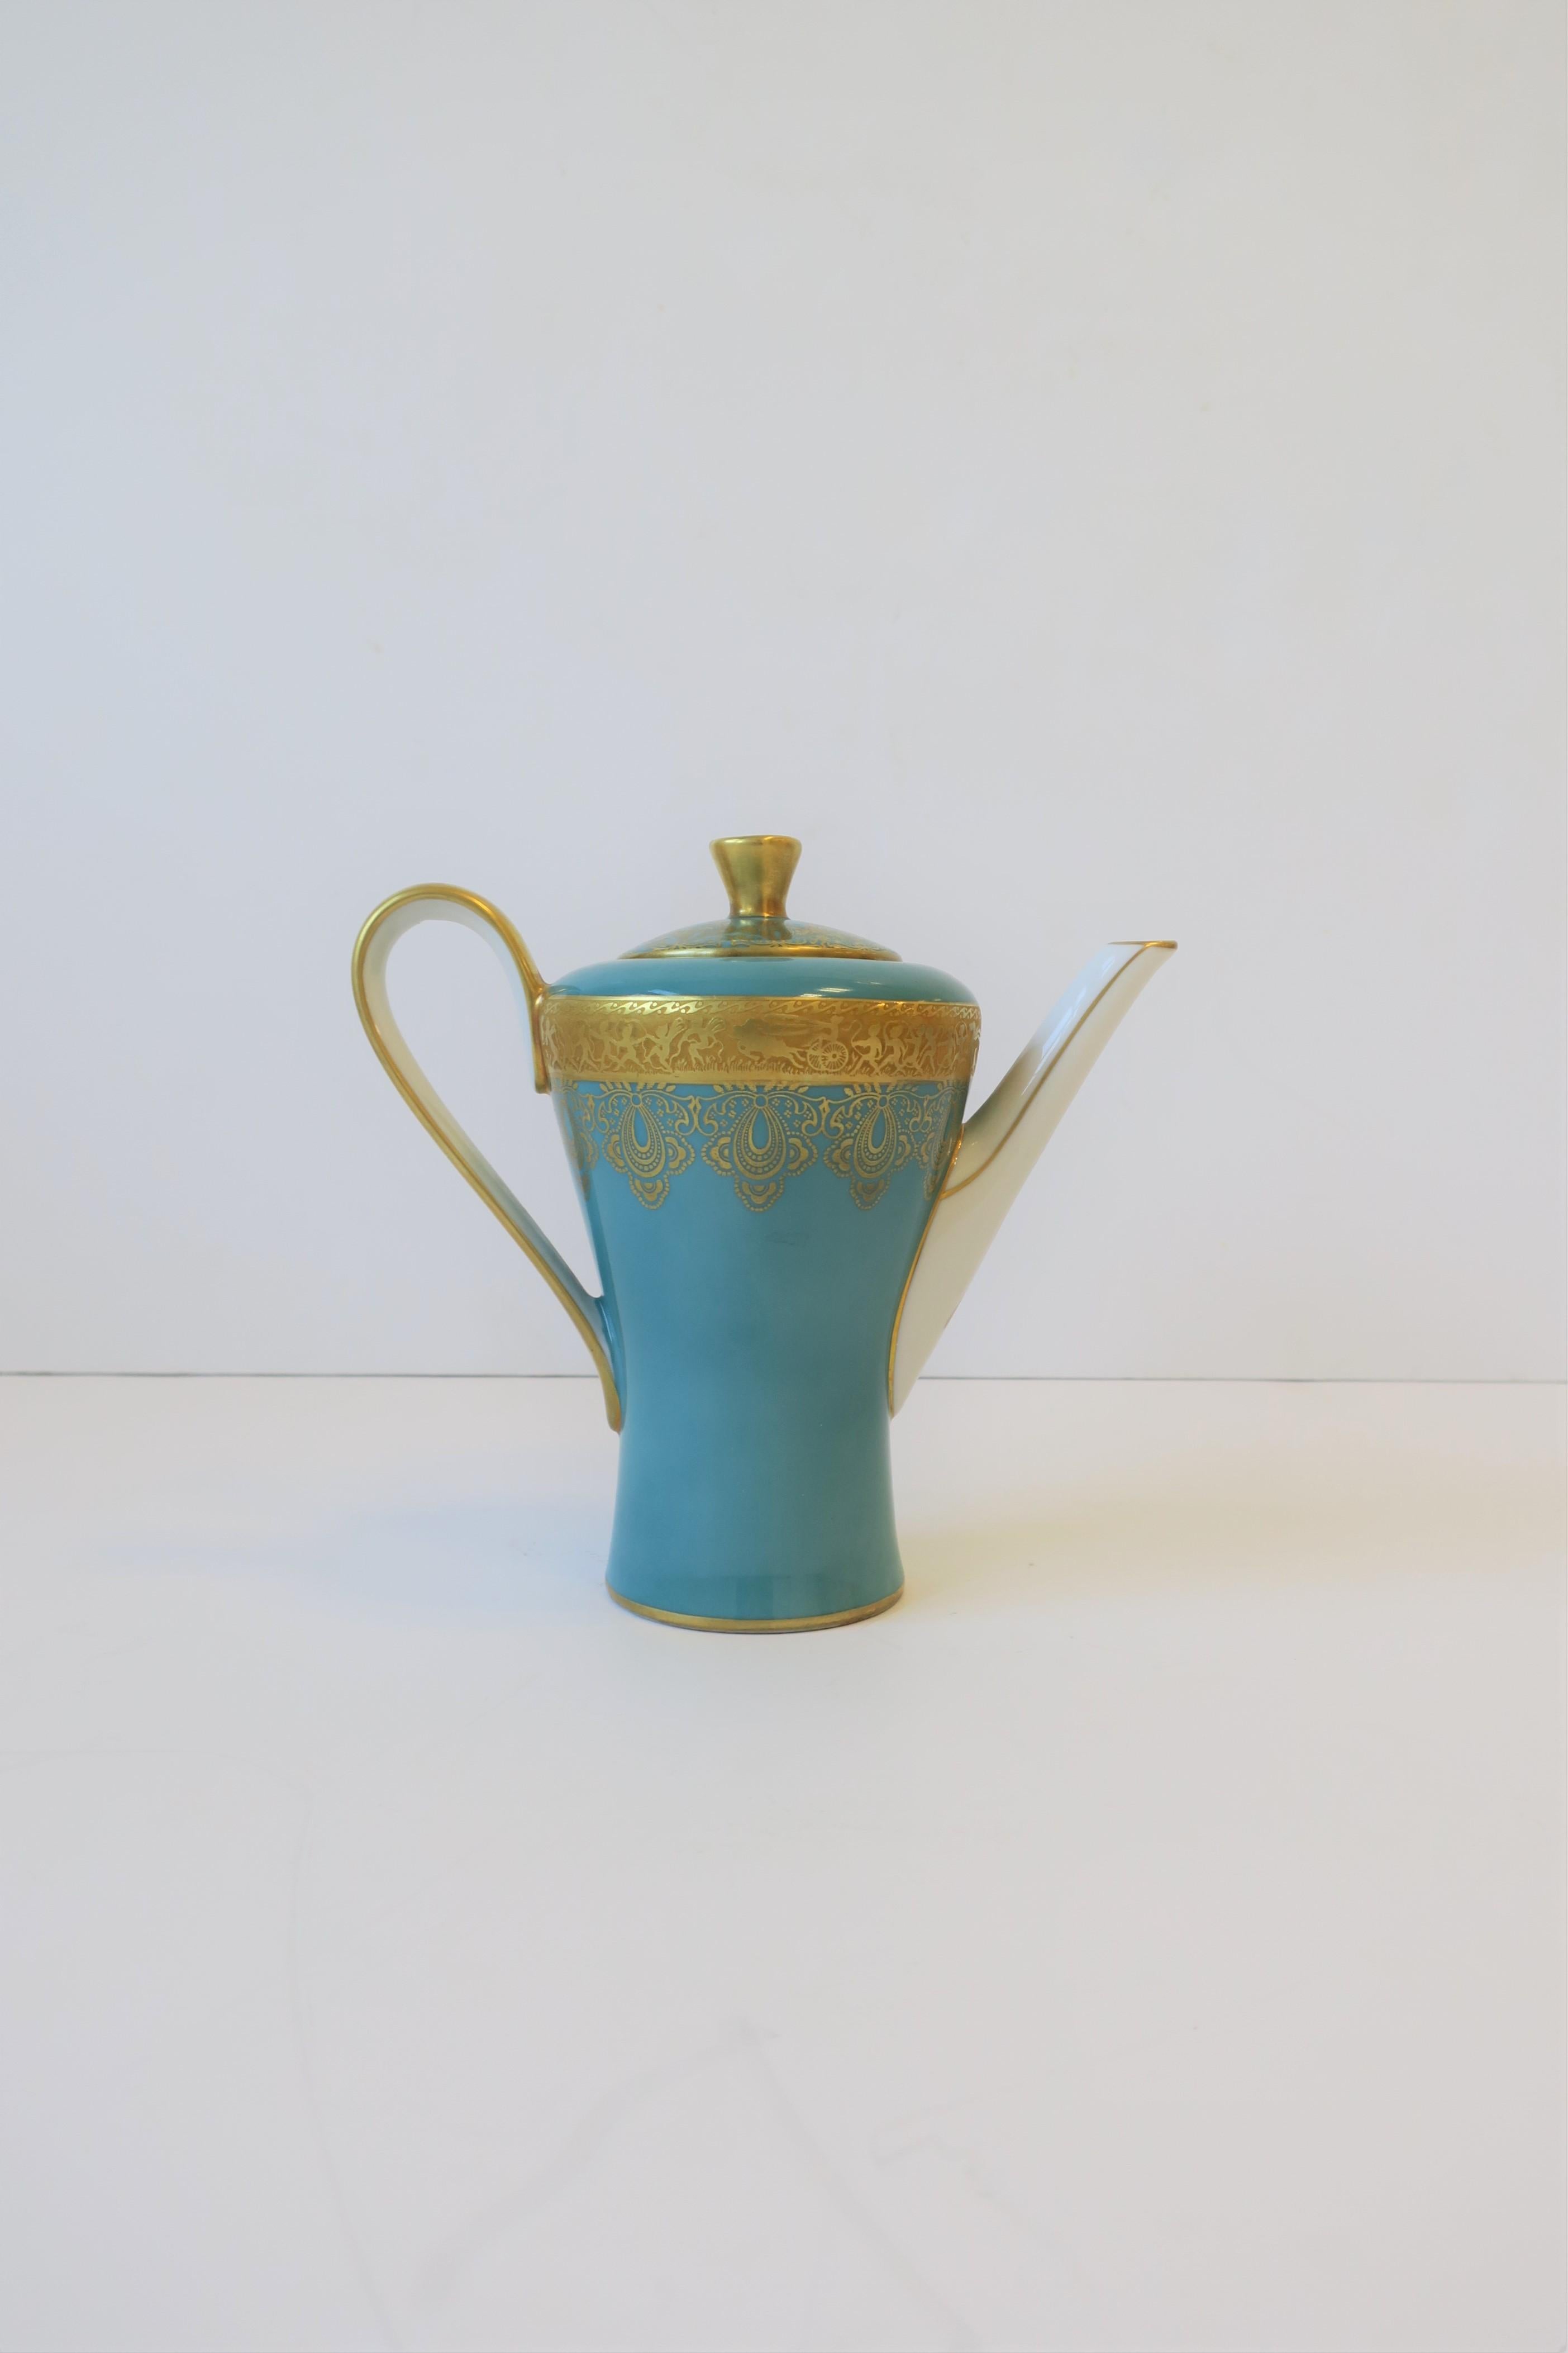 German Blue White and Gold Porcelain Tea or Coffee Pot 1